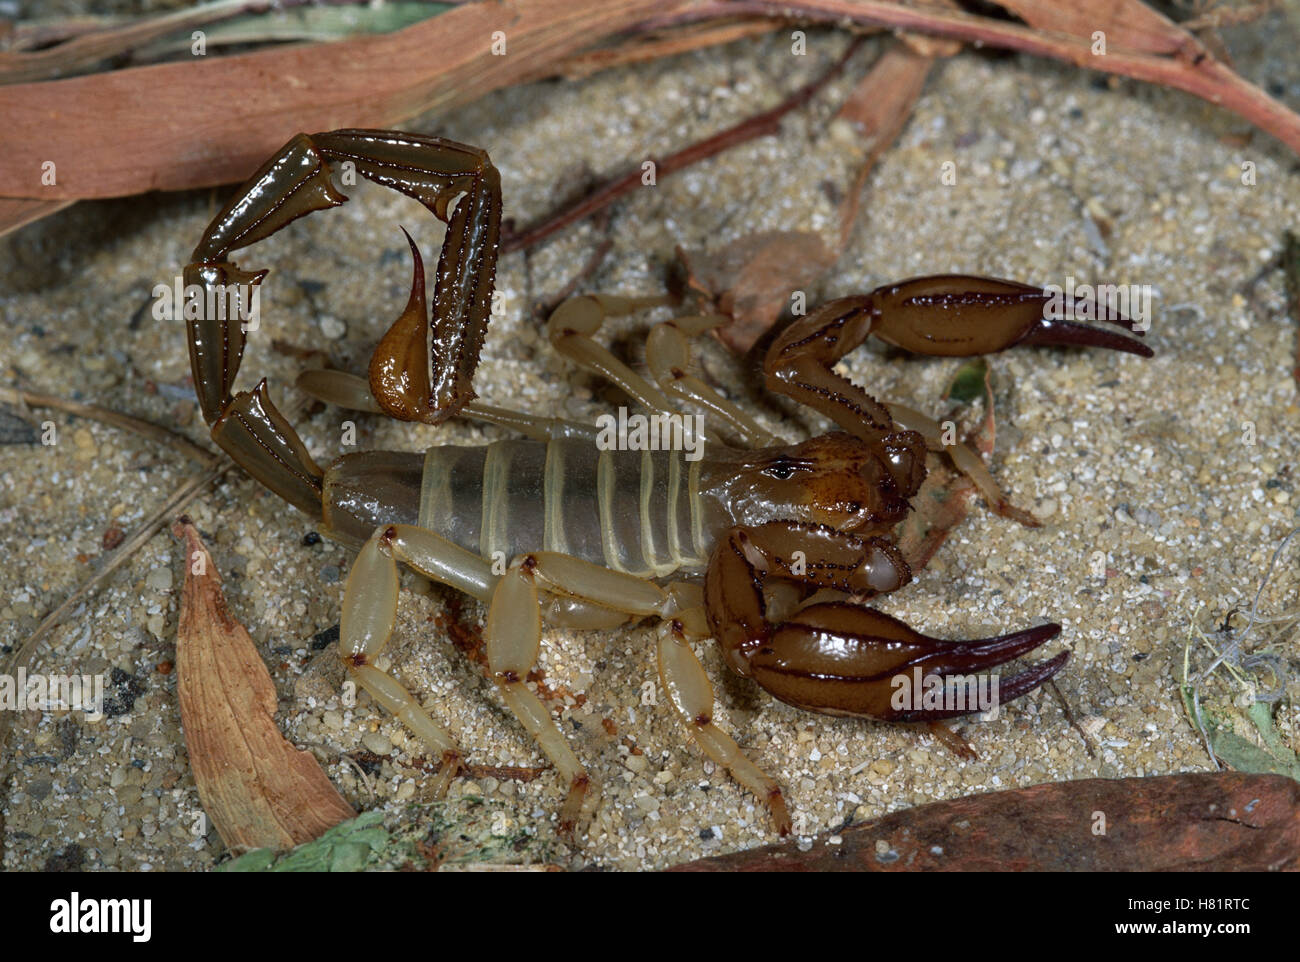 Scorpion, showing claws and tail with venomous stinger, Nambung National Park, Western Australia Stock Photo